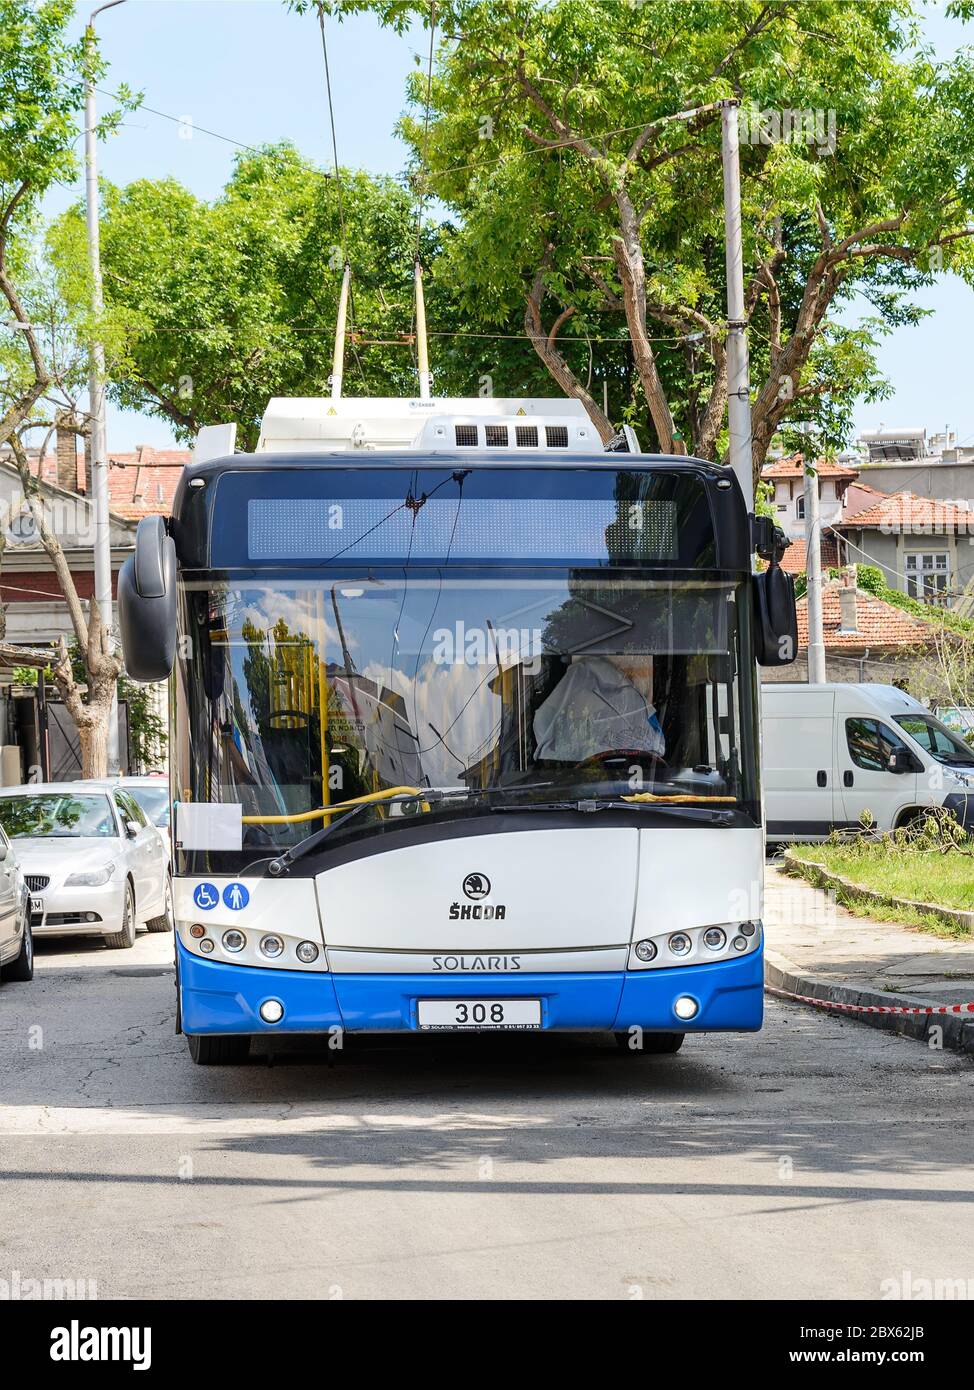 Varna, Bulgaria, June 04, 2020. White blue Skoda trolleybus based on Solaris vehicle on a city street on a sunny summer day. City electric transport. Stock Photo